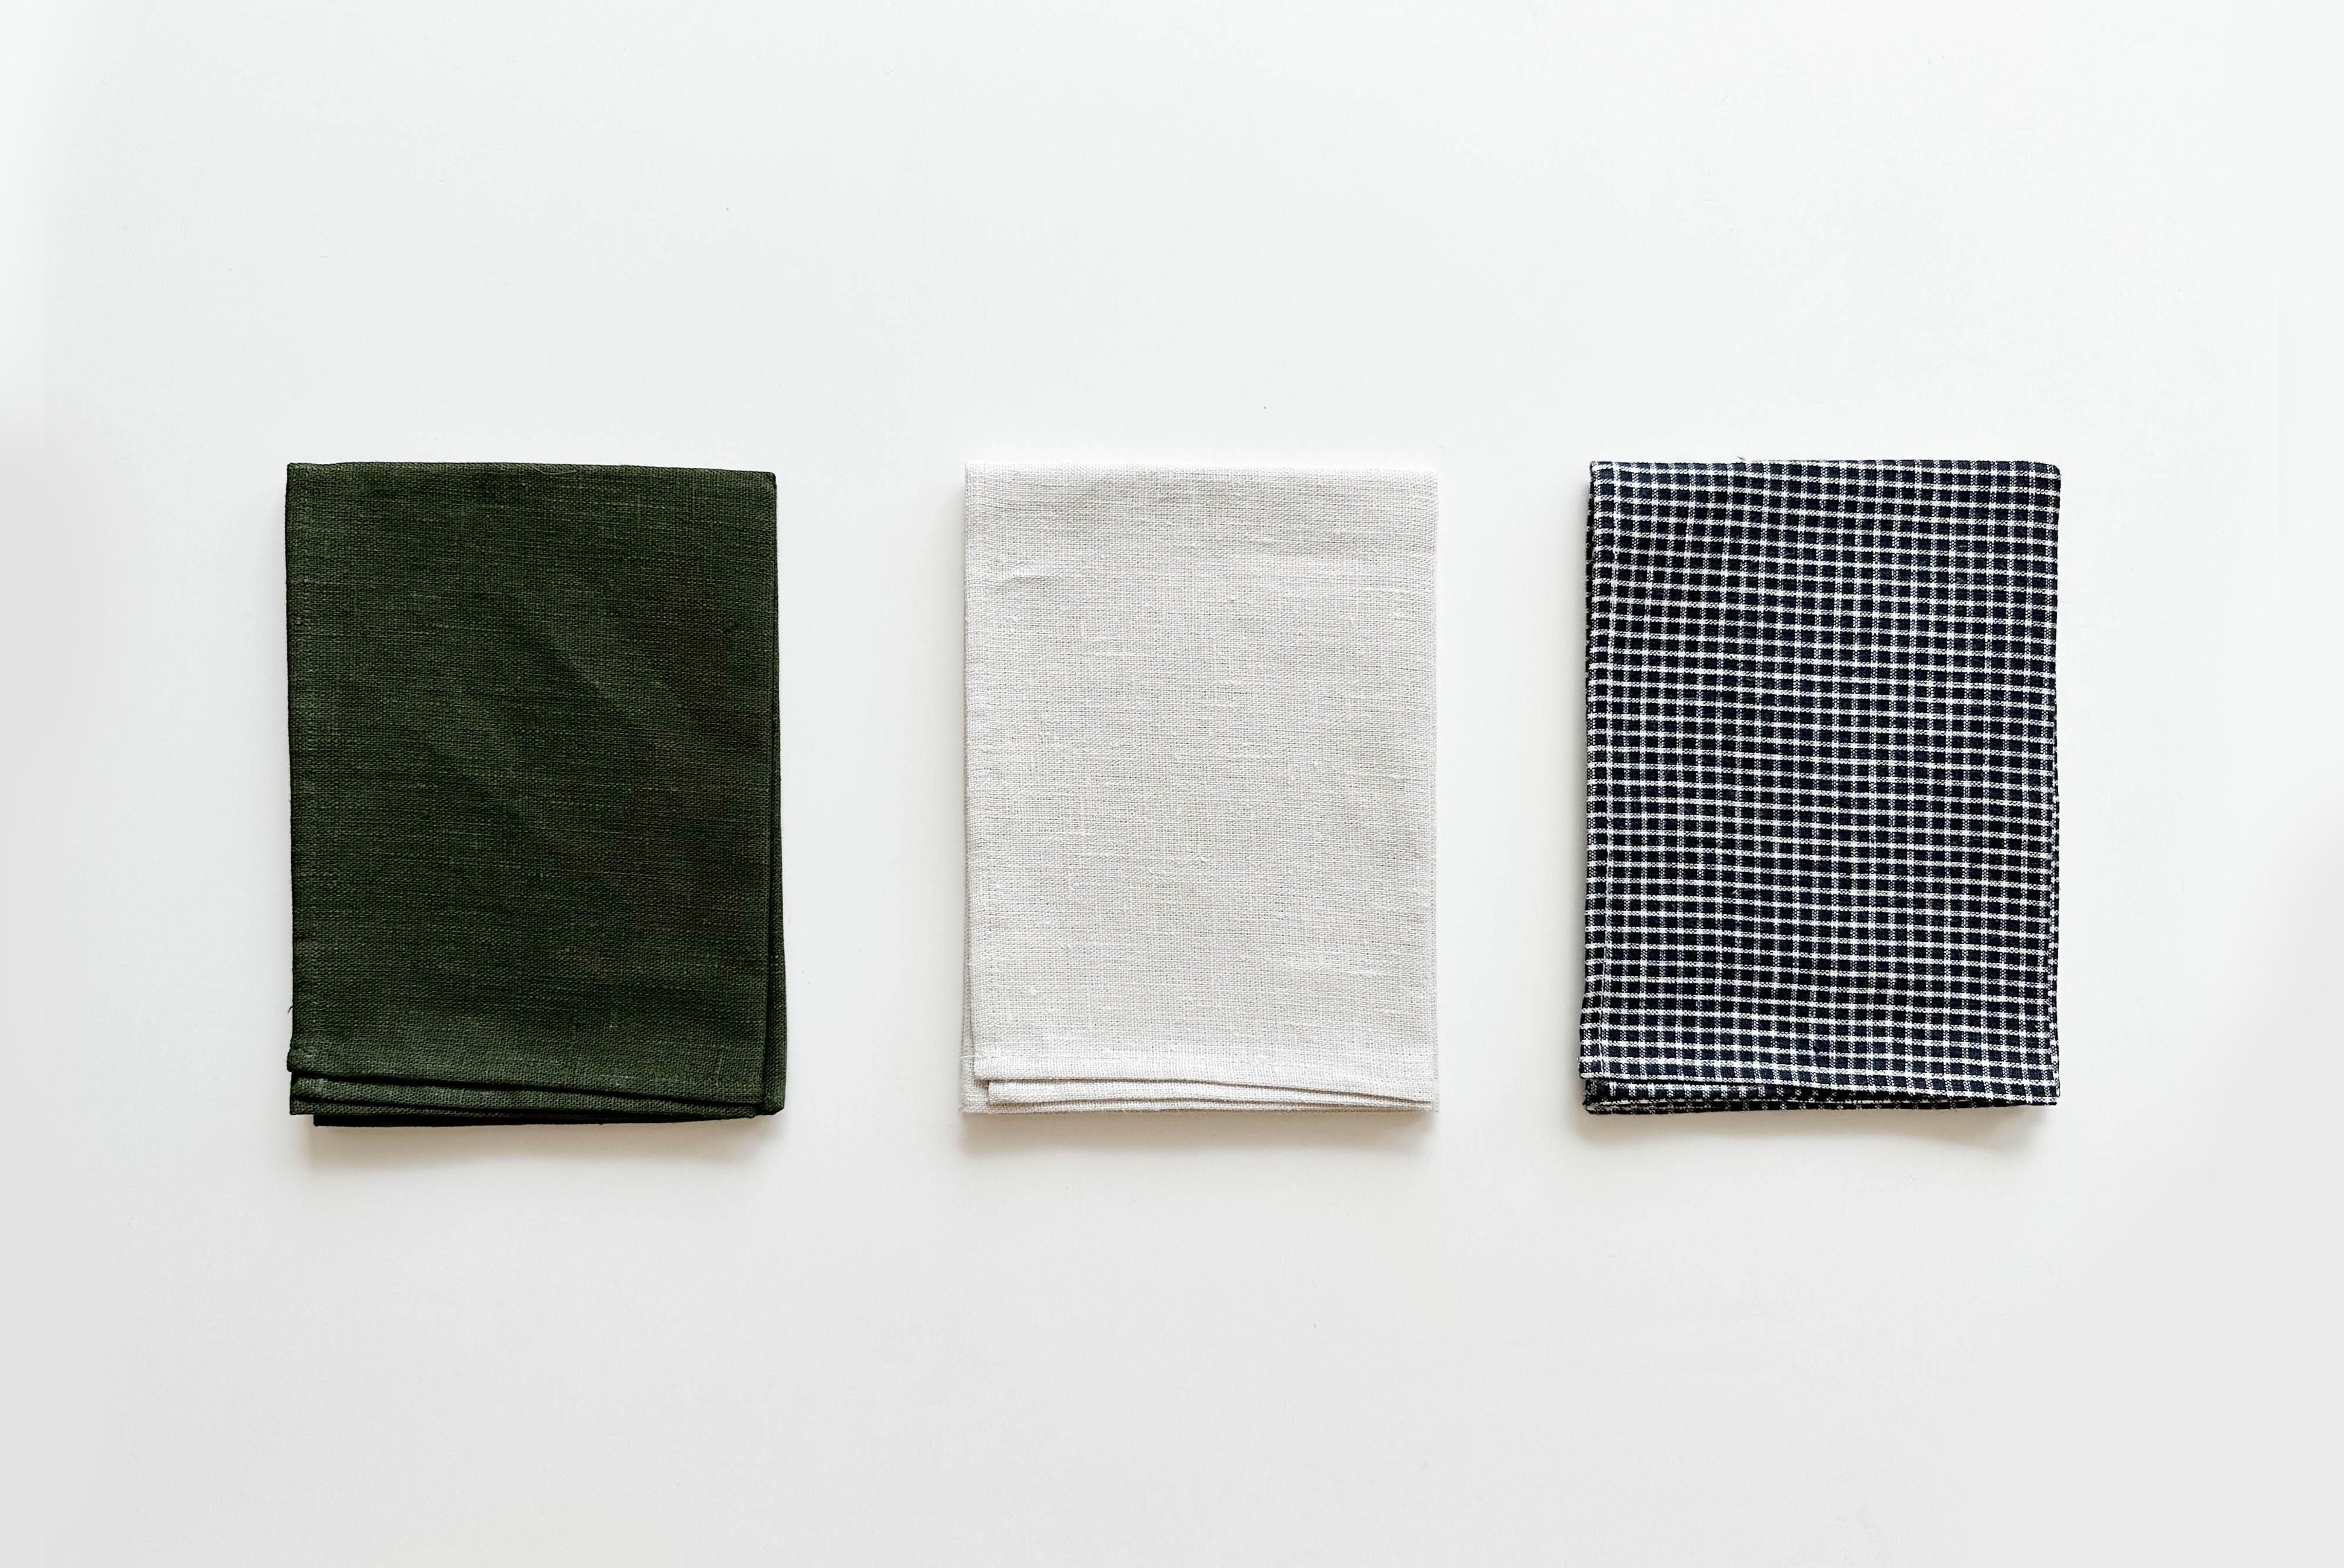 Fog Linen Kitchen Towel shown folded and in three colors | product detail